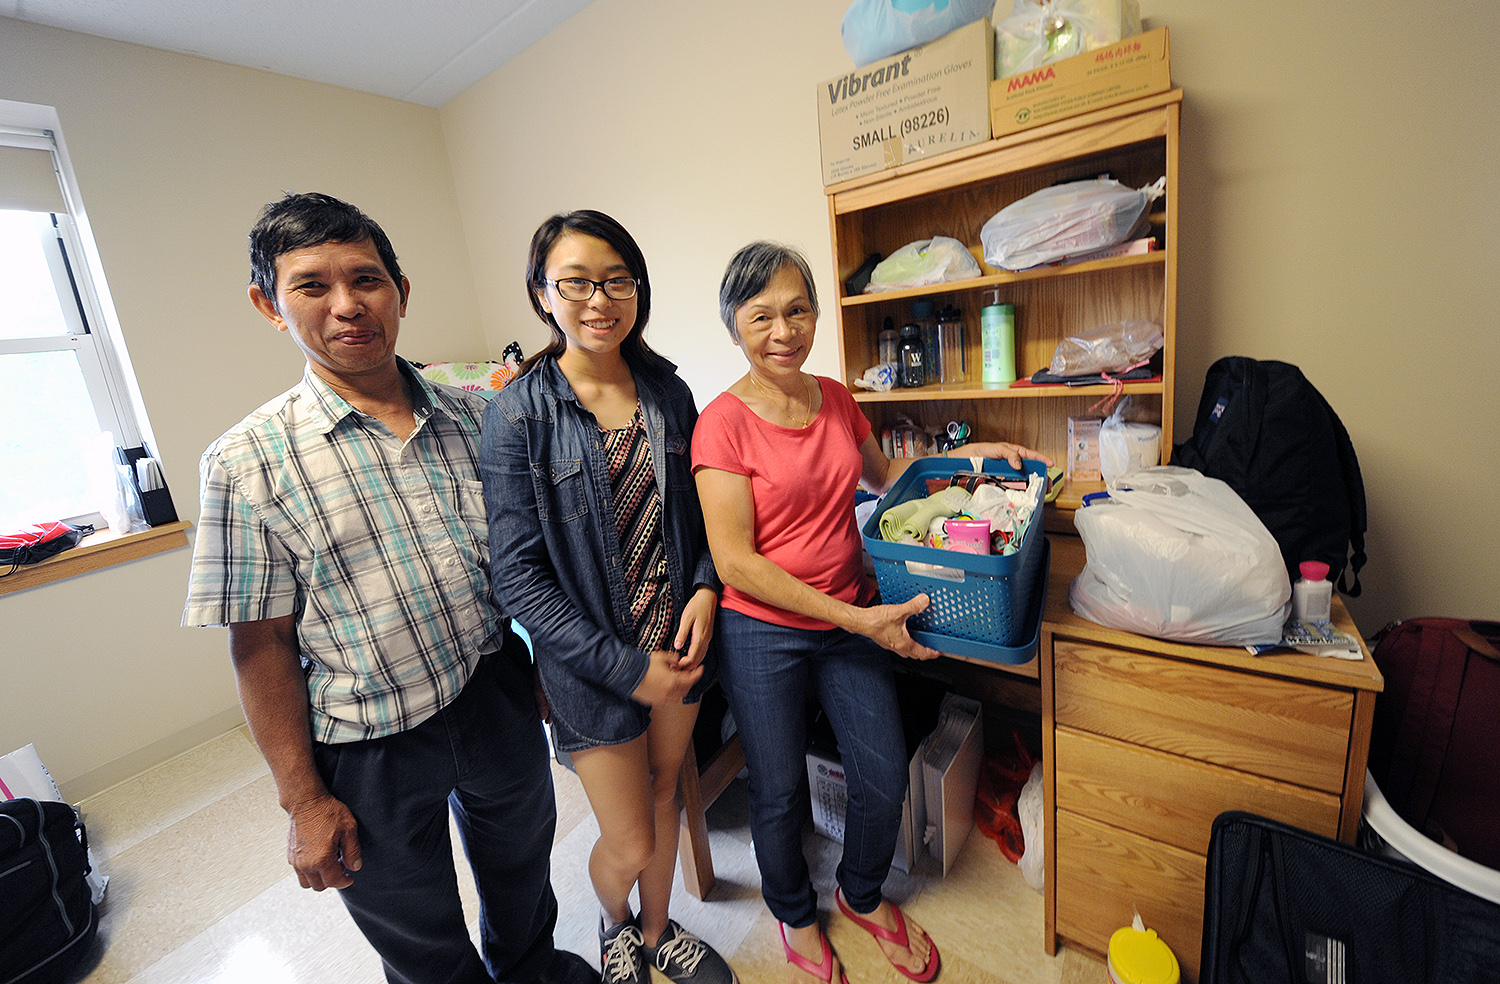 ennifer Luong ’20 of Newnan, Ga., moved into her dorm with help from her parents Manh and Nu. Jennifer, who is roommates with Mary McAllister ’20, may major in science, but is still undecided. She came to Wesleyan for the open curriculum and the connections one can make in a small community.